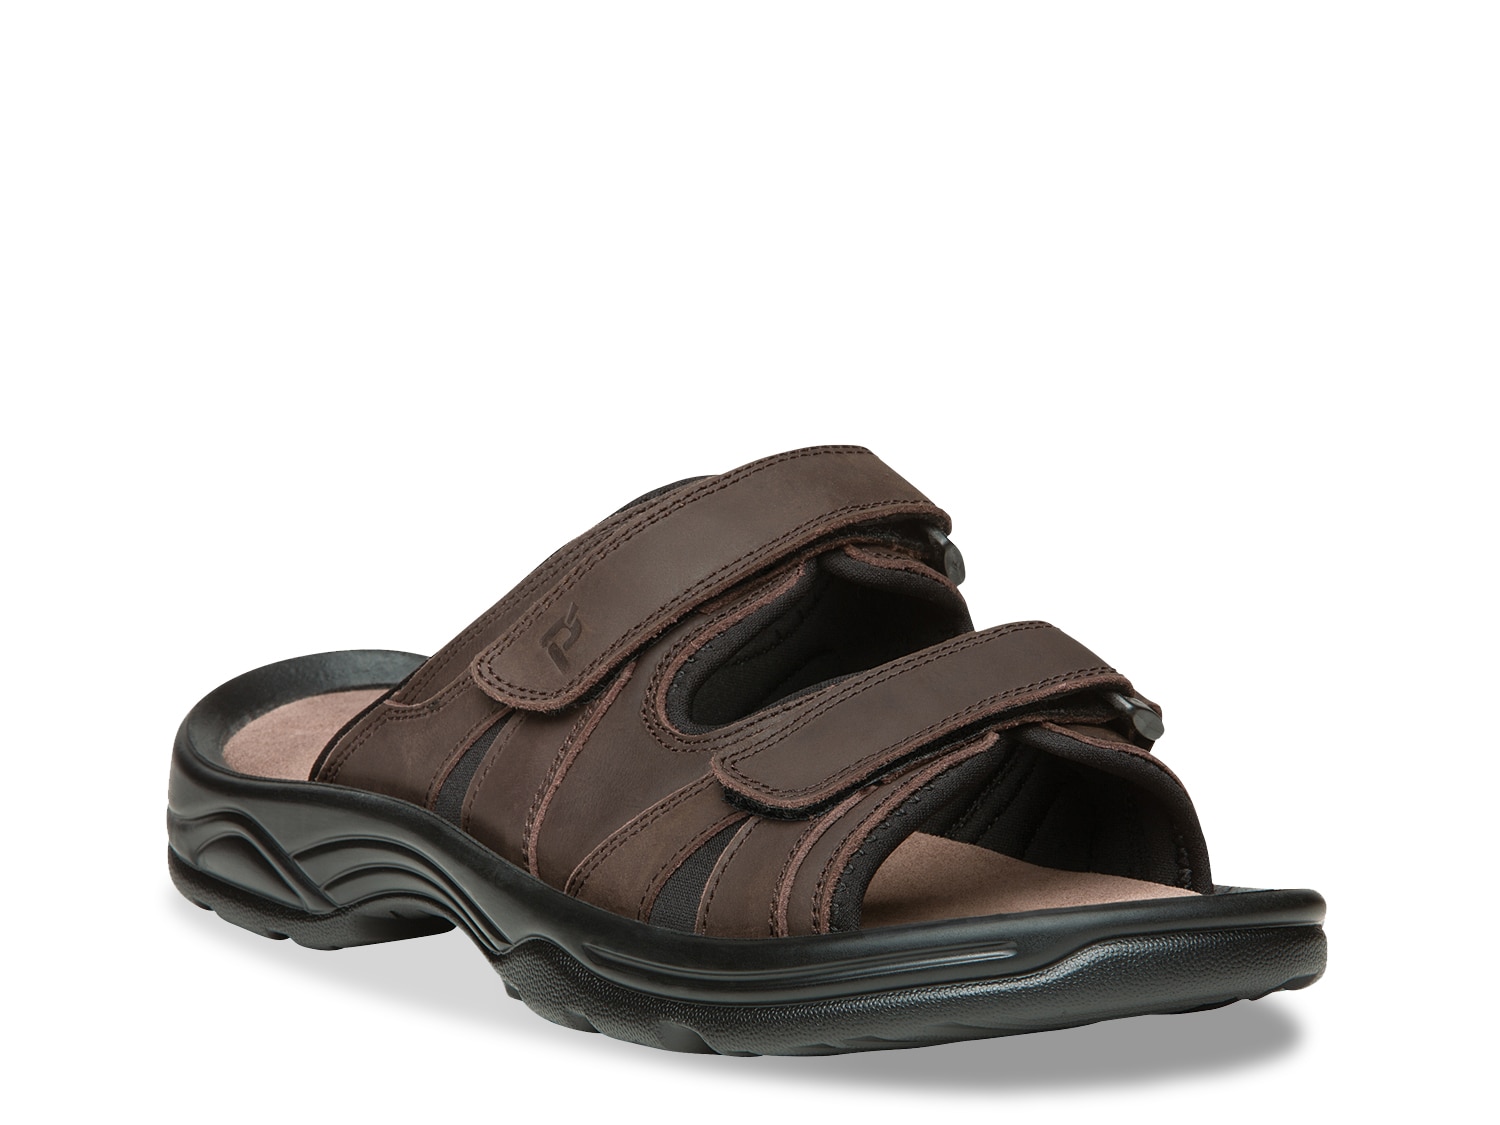 mens sandals extra wide width